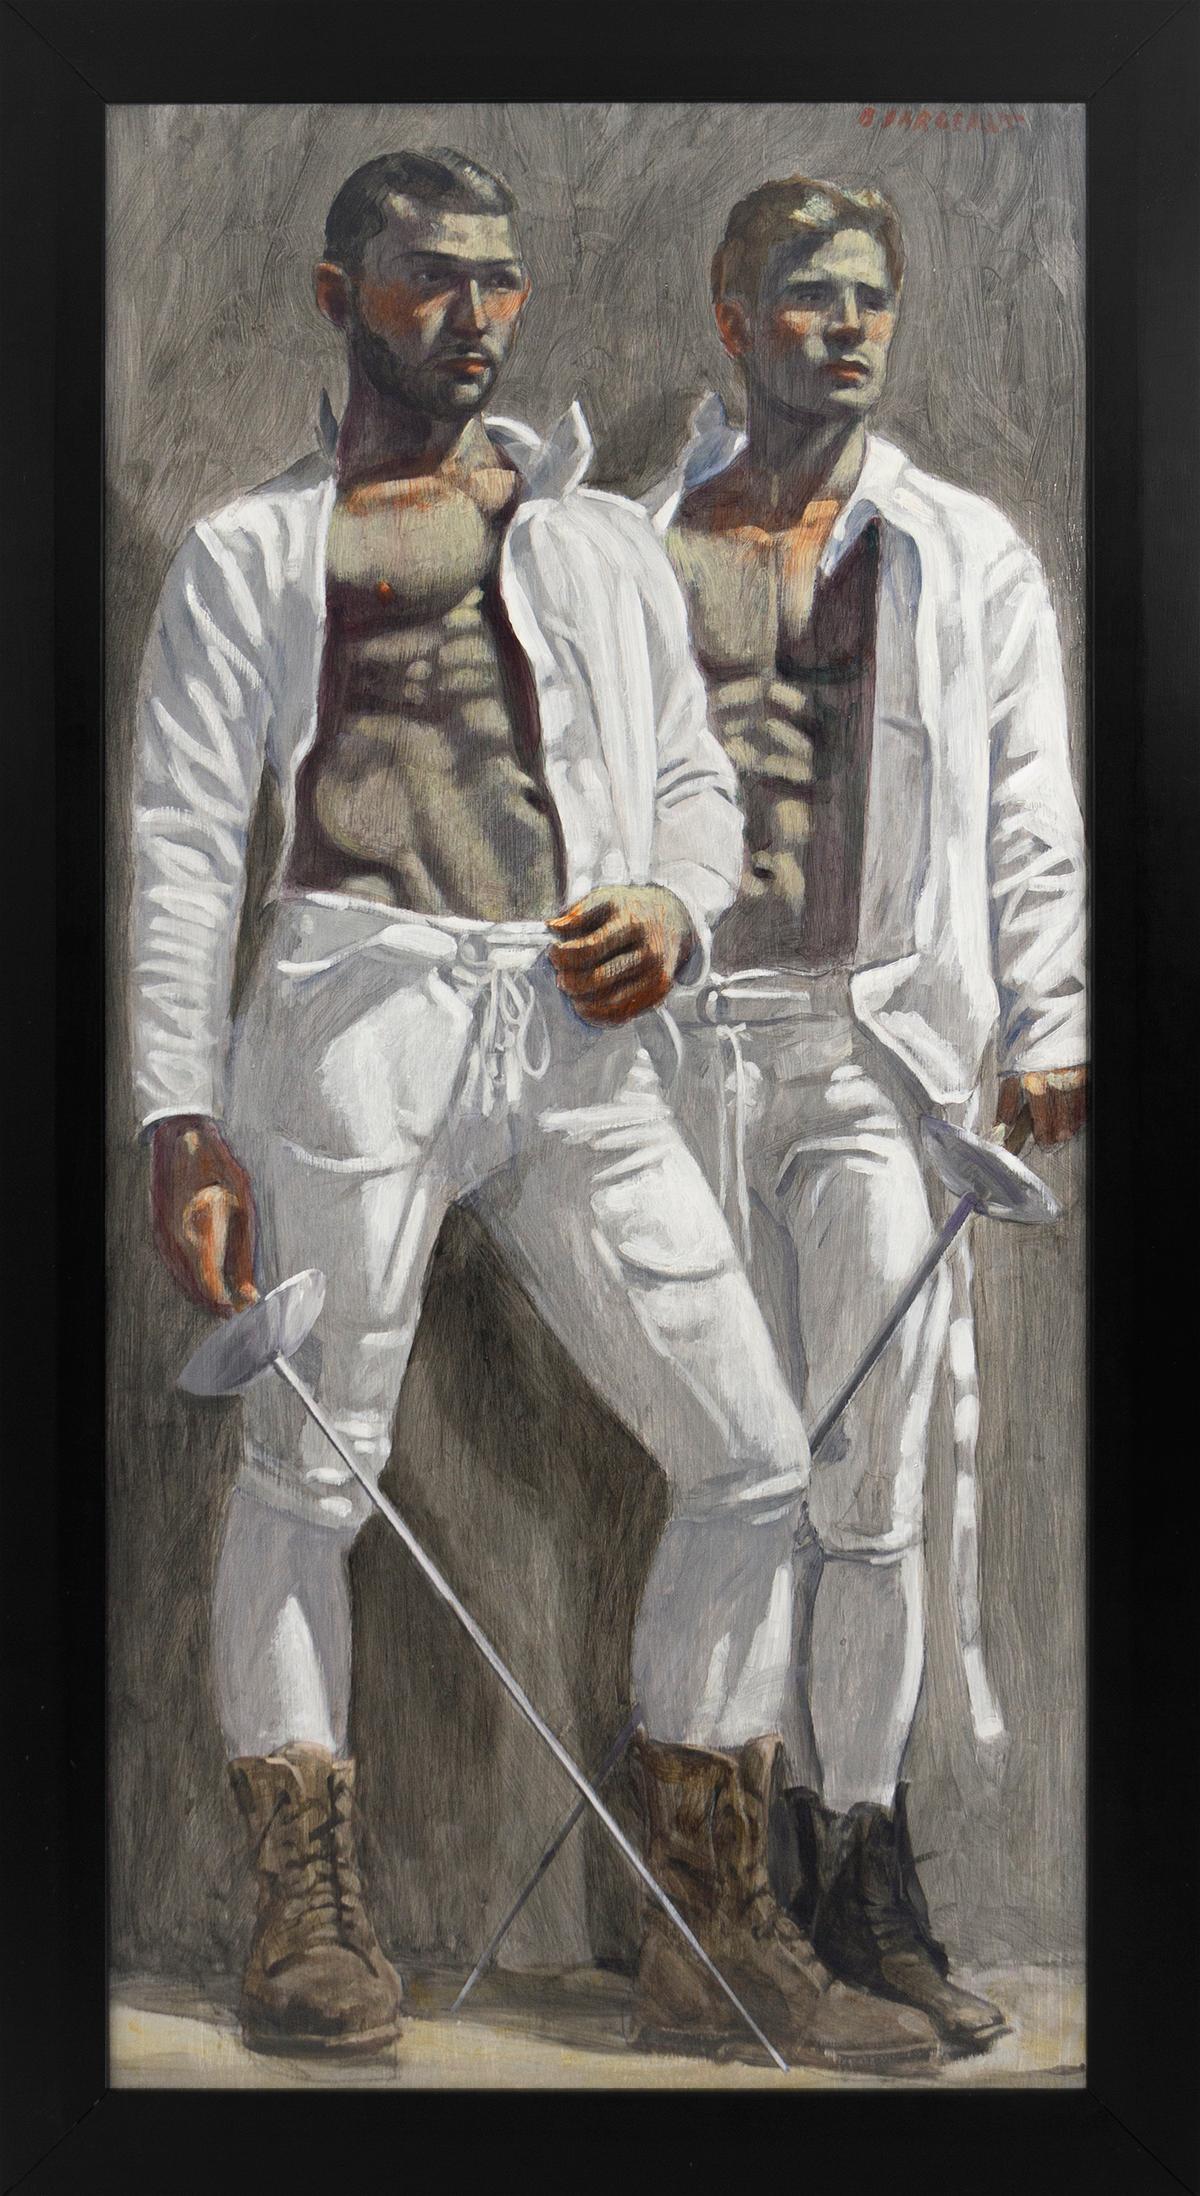 [Bruce Sargeant (1898-1938)] Two Fencers Watching a Match